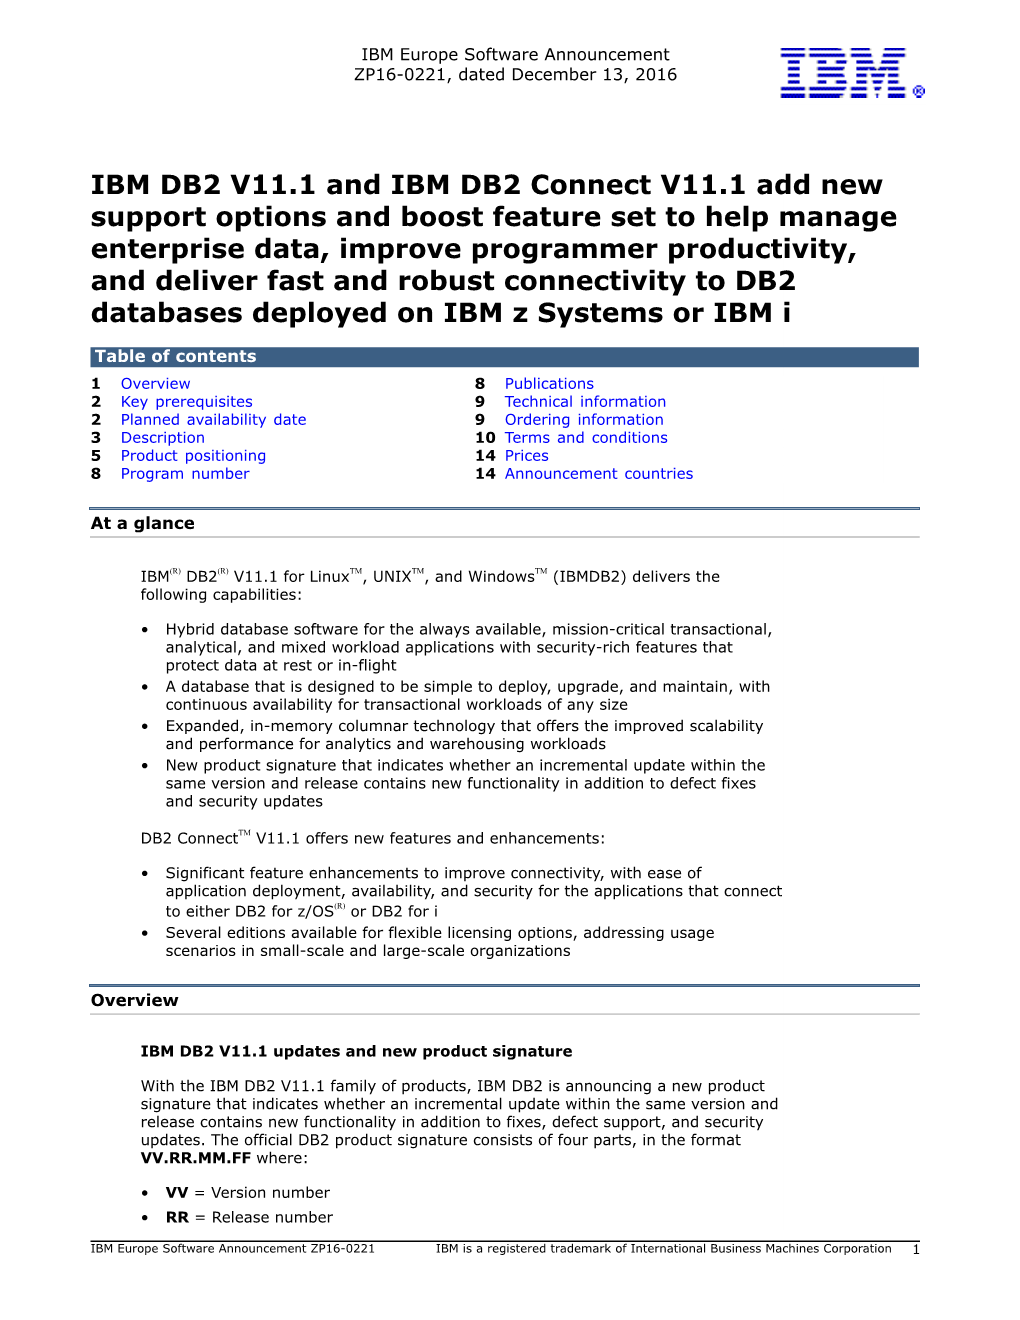 IBM DB2 V11.1 and IBM DB2 Connect V11.1 Add New Support Options and Boost Feature Set to Help Manage Enterprise Data, Improve Pr